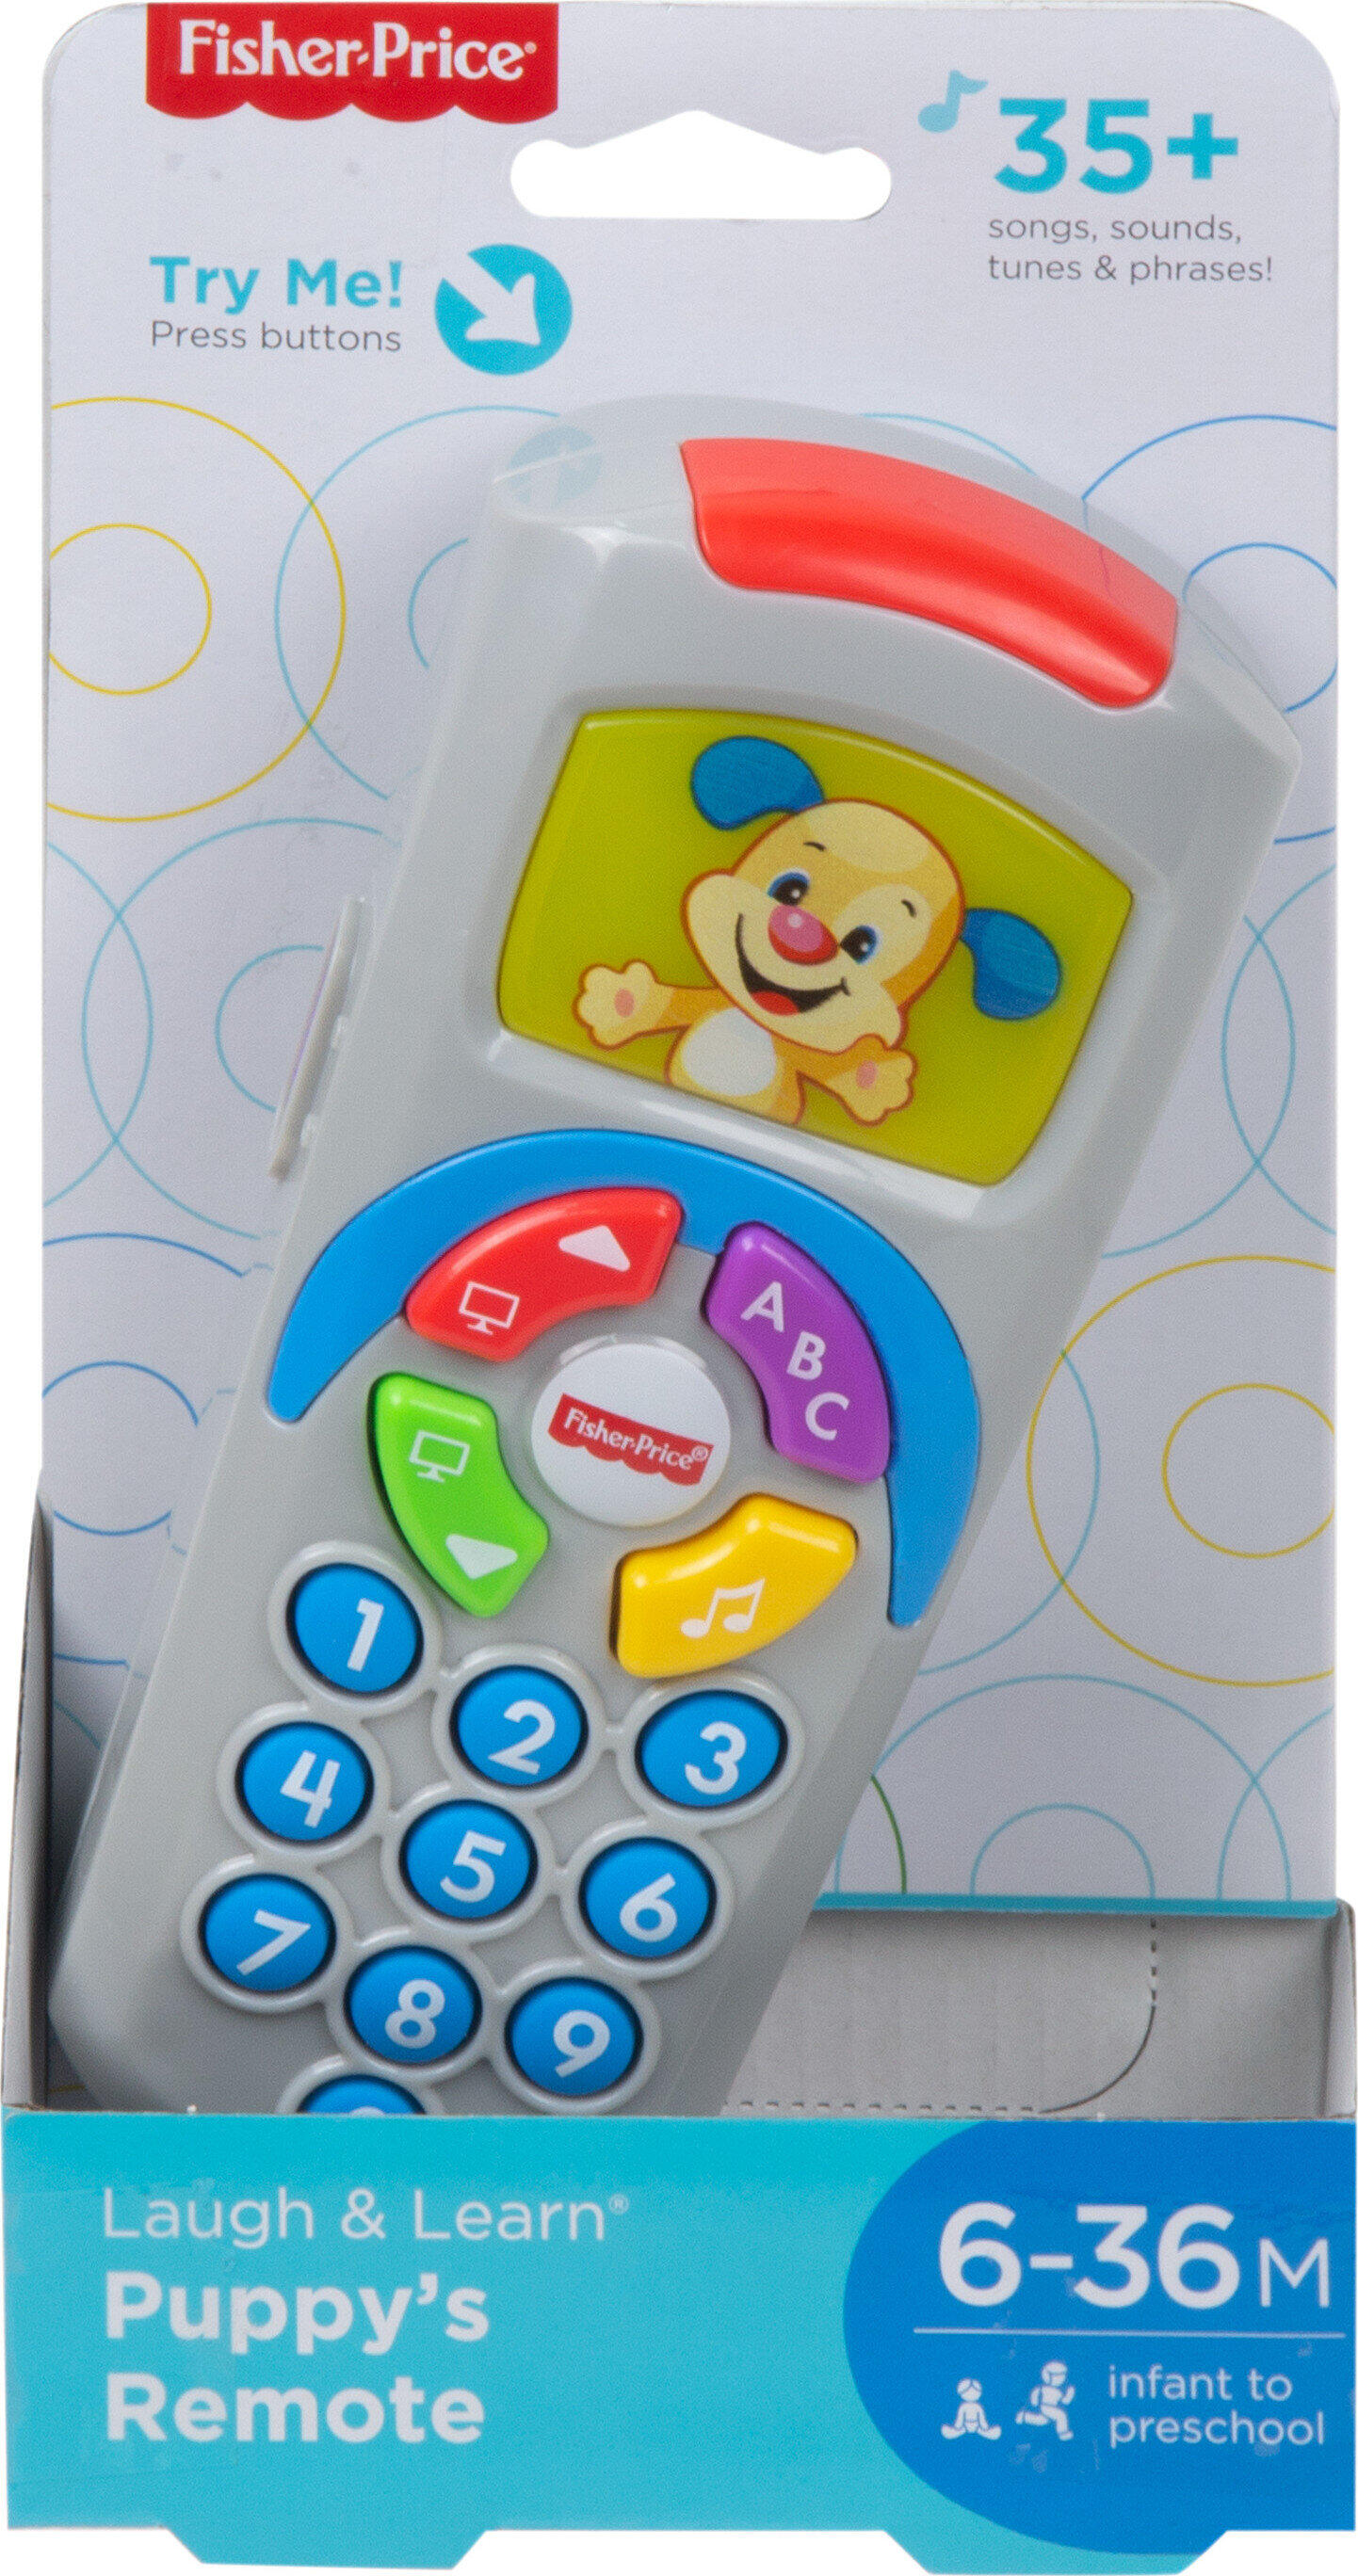 Fisher-Price Laugh & Learn Puppy’s Remote Baby & Toddler Learning Toy with Music & Lights - image 7 of 7